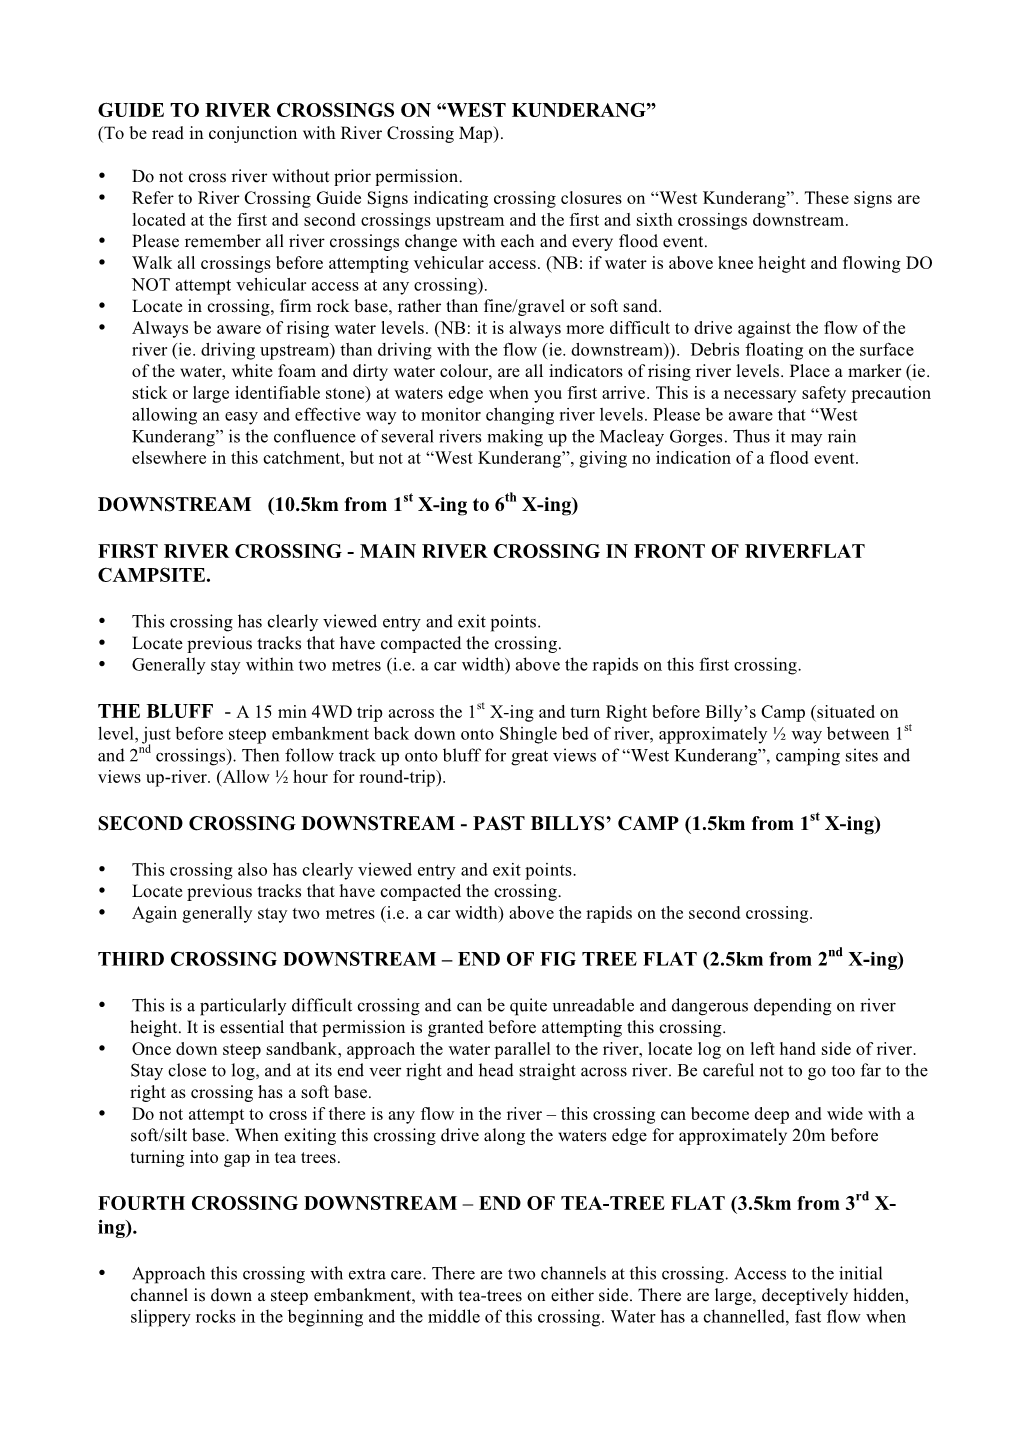 Guide to River Crossings Info Sept 04